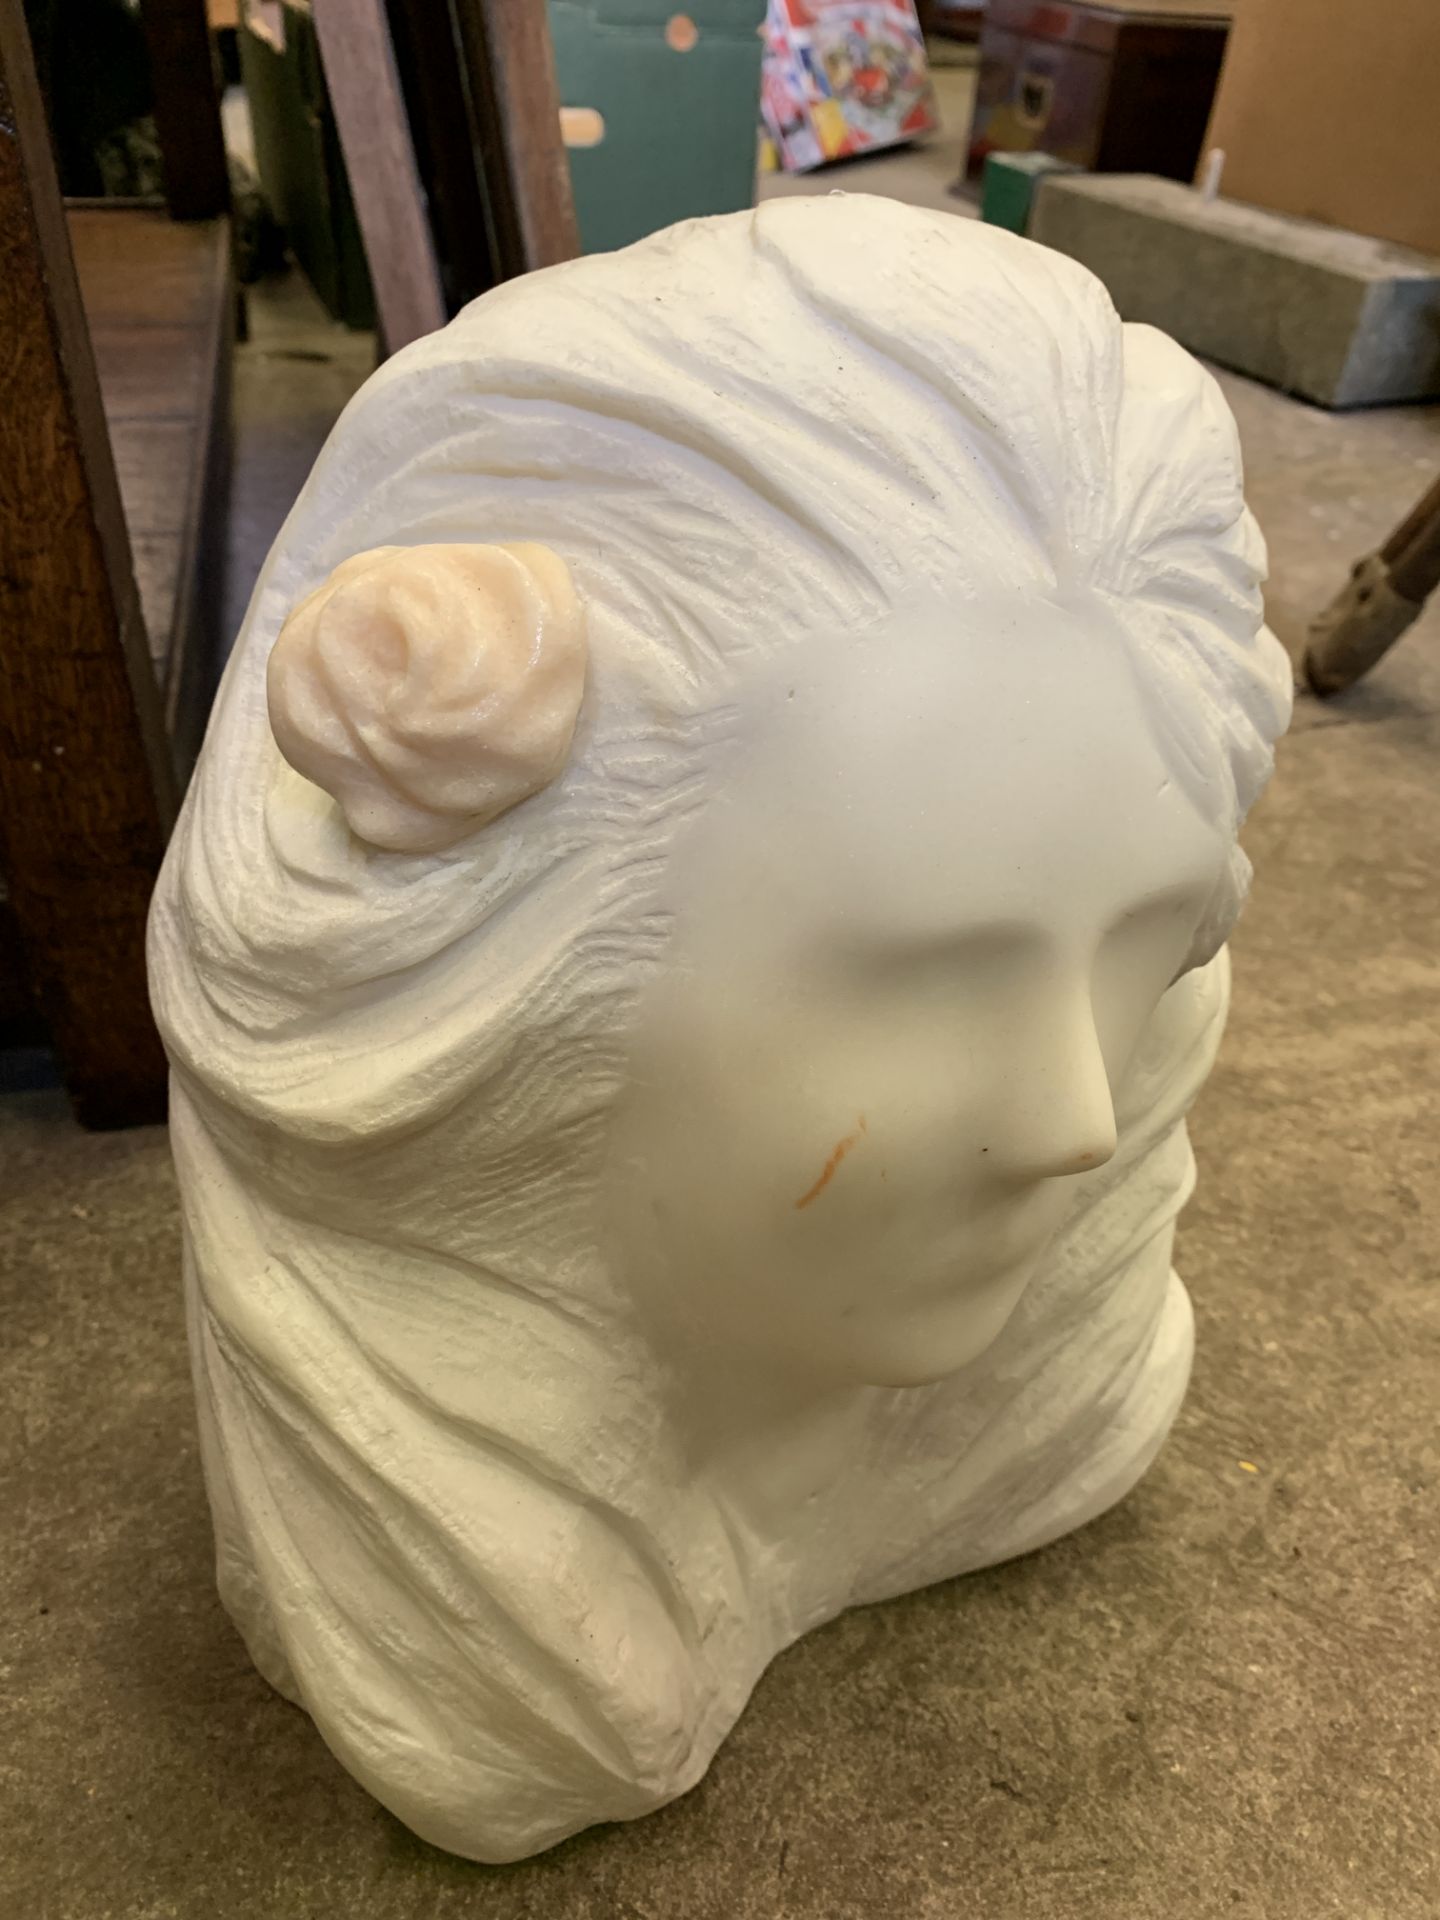 Stone sculpture of a woman's head by Fiona Goldbacher - Image 2 of 2